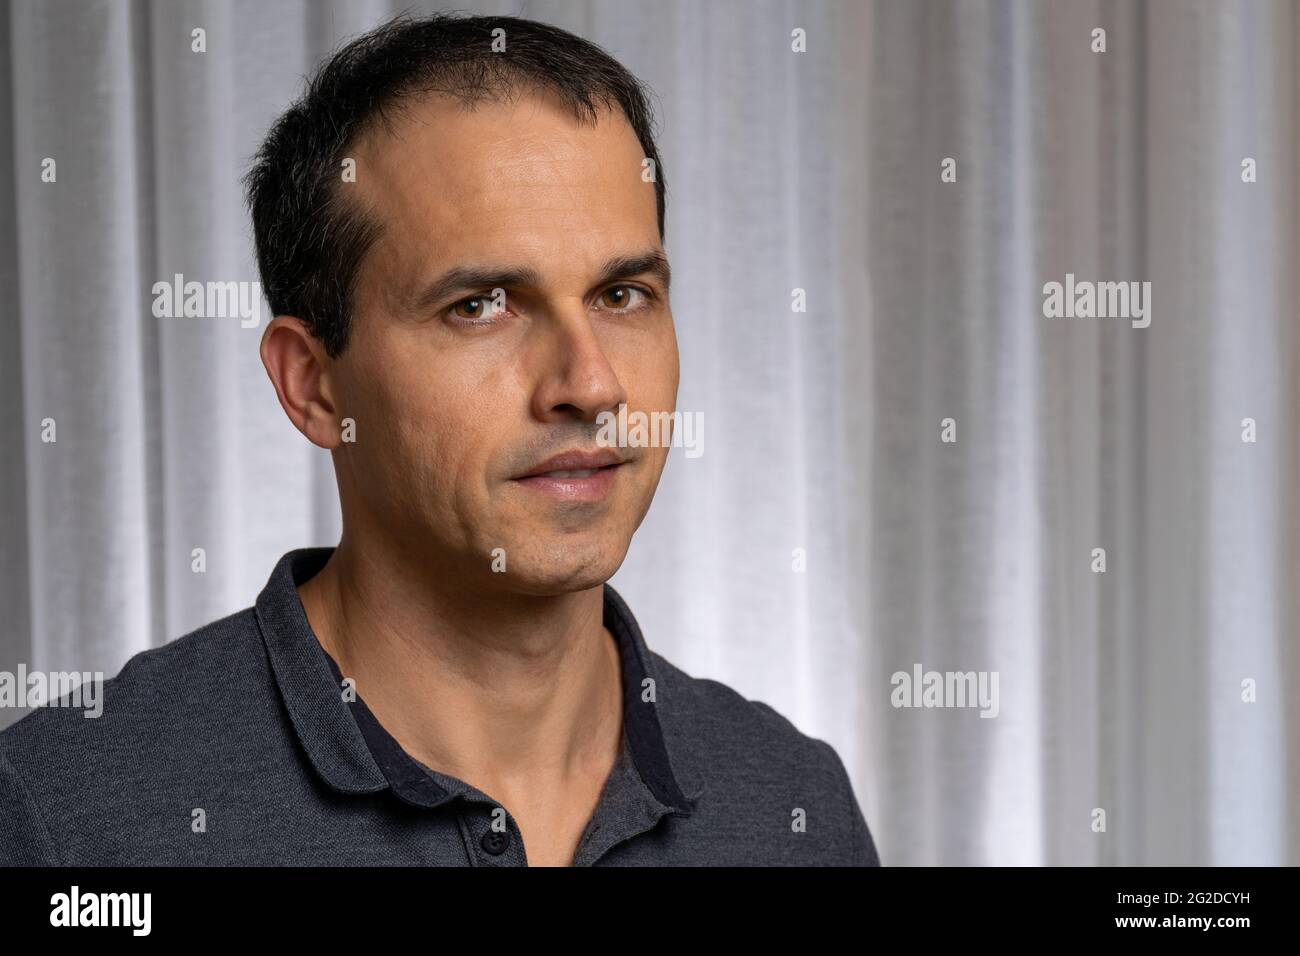 Mature Man 44 Years Old In Photo Session With Dark Blue Polo Shirt Making Several Faces Stock